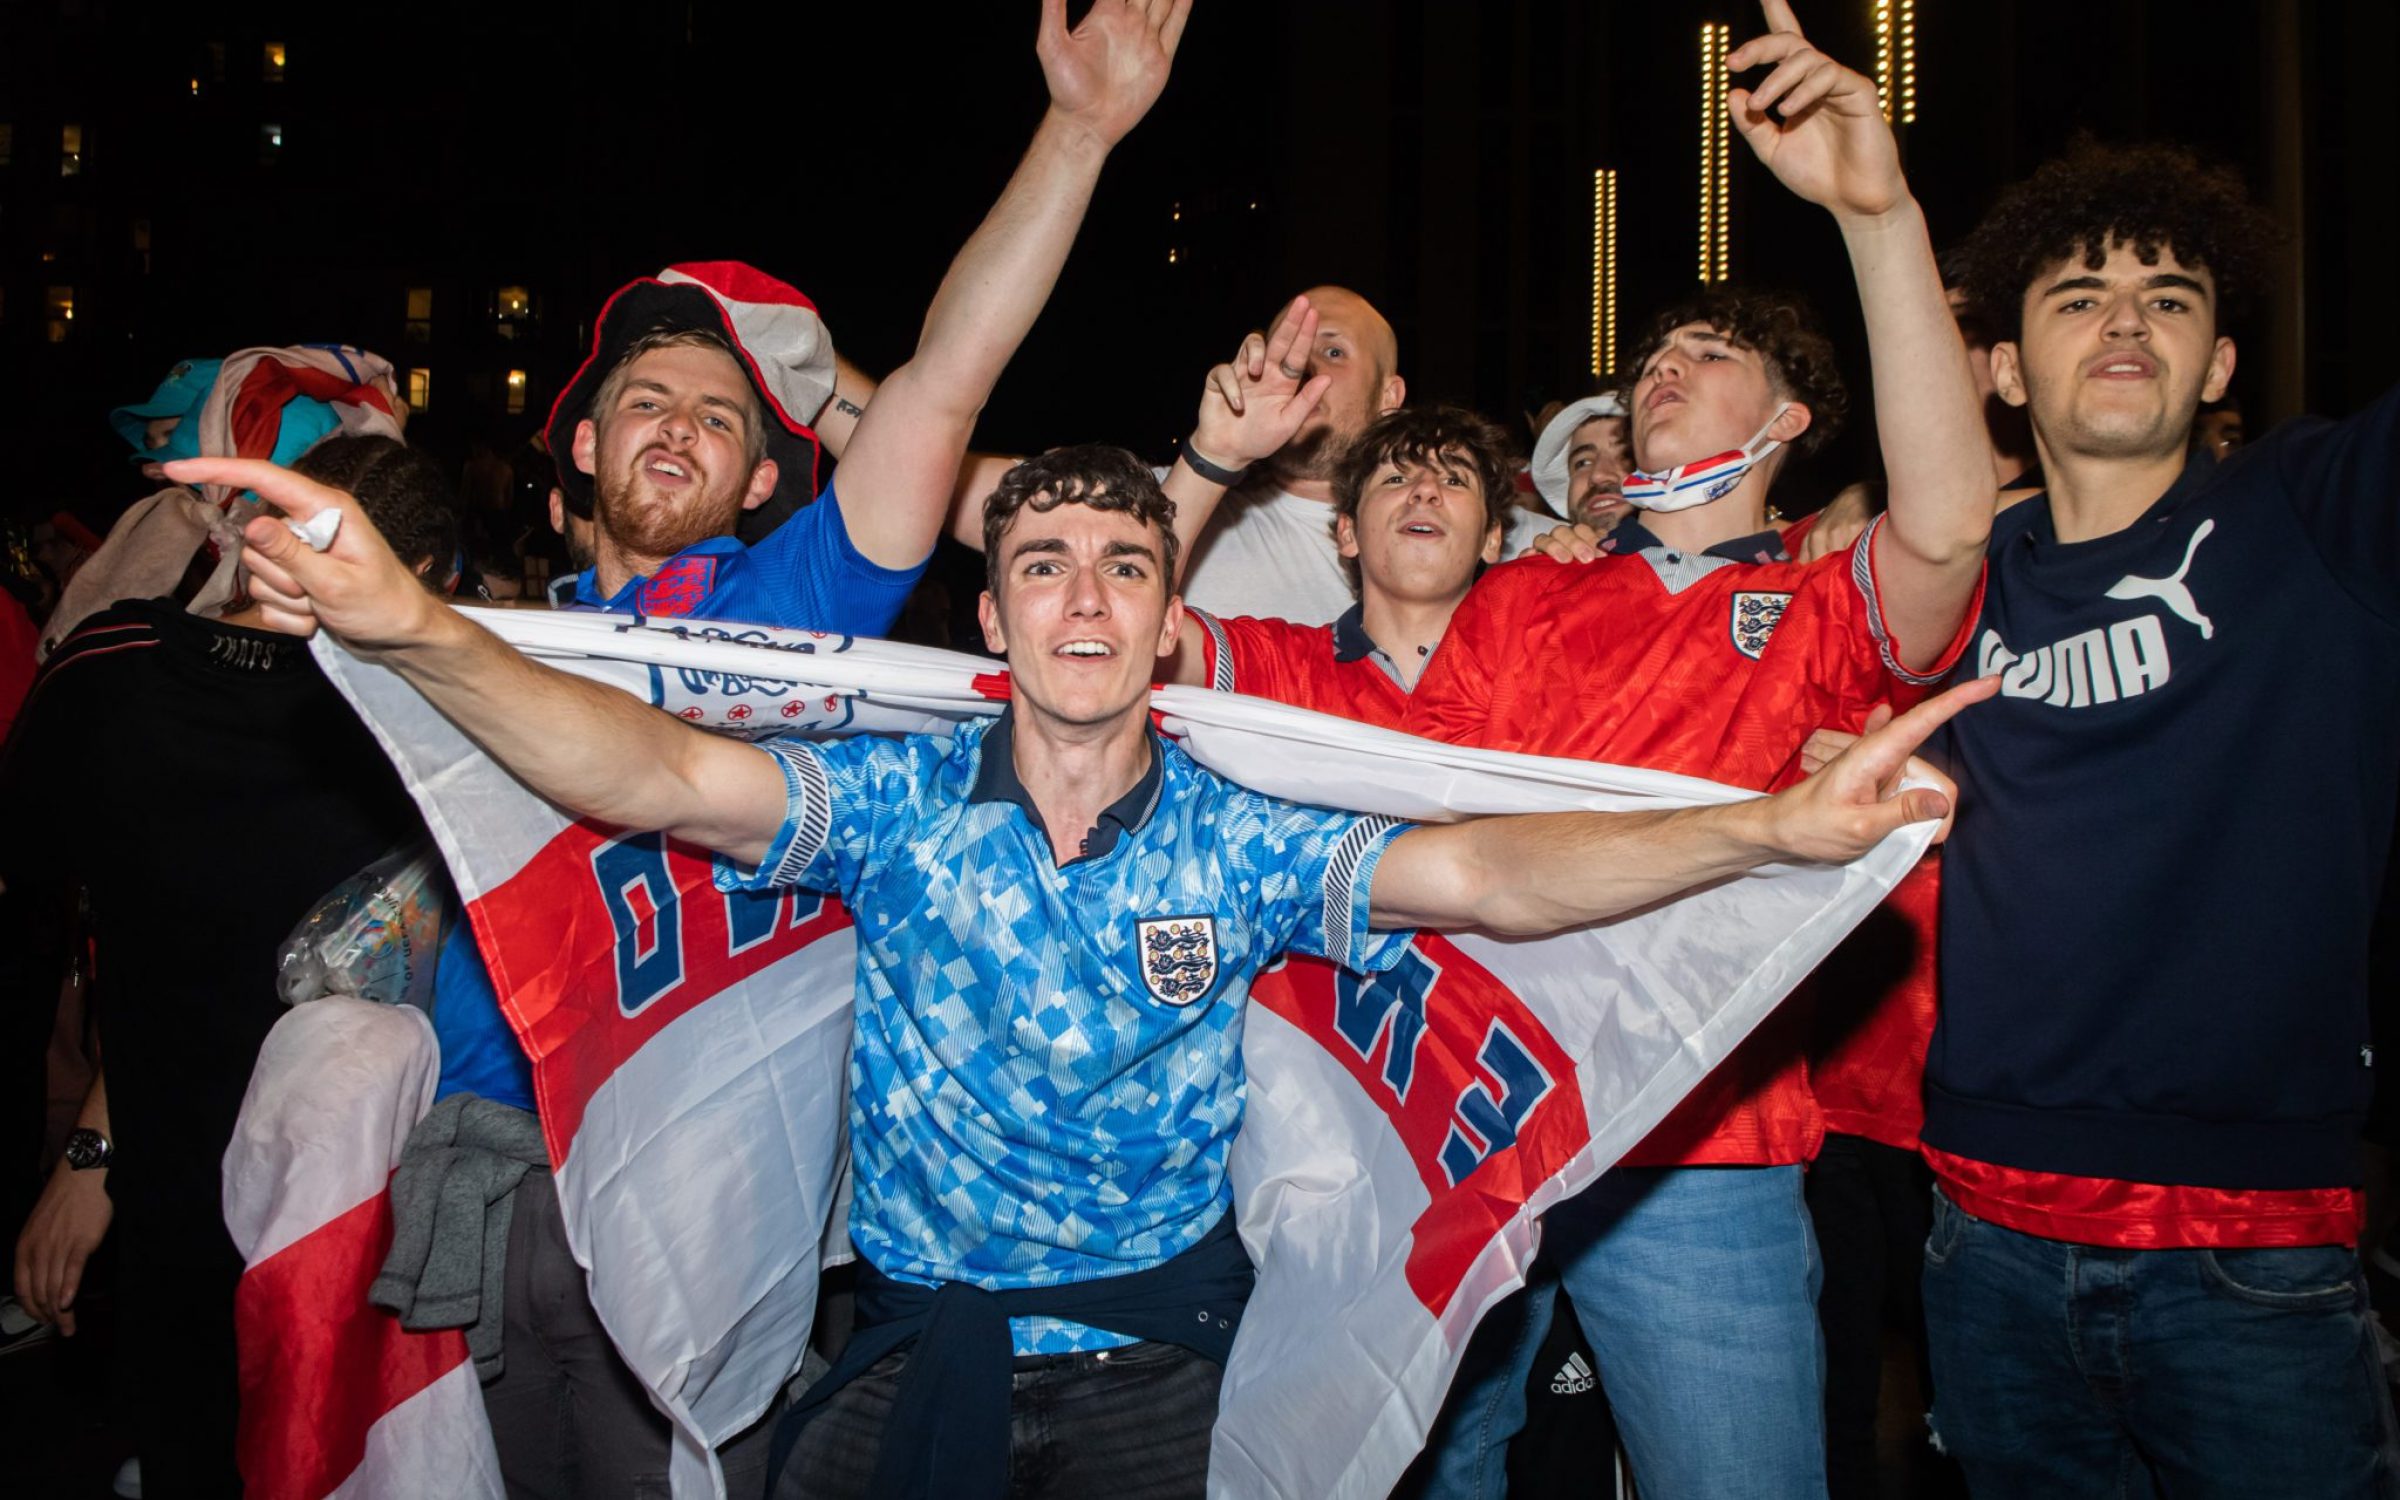 England fans excited after a 2 - 1 win at the UEFA Euro 2020 Championship Semi-final match between England and Denmark at Wembley Stadium.